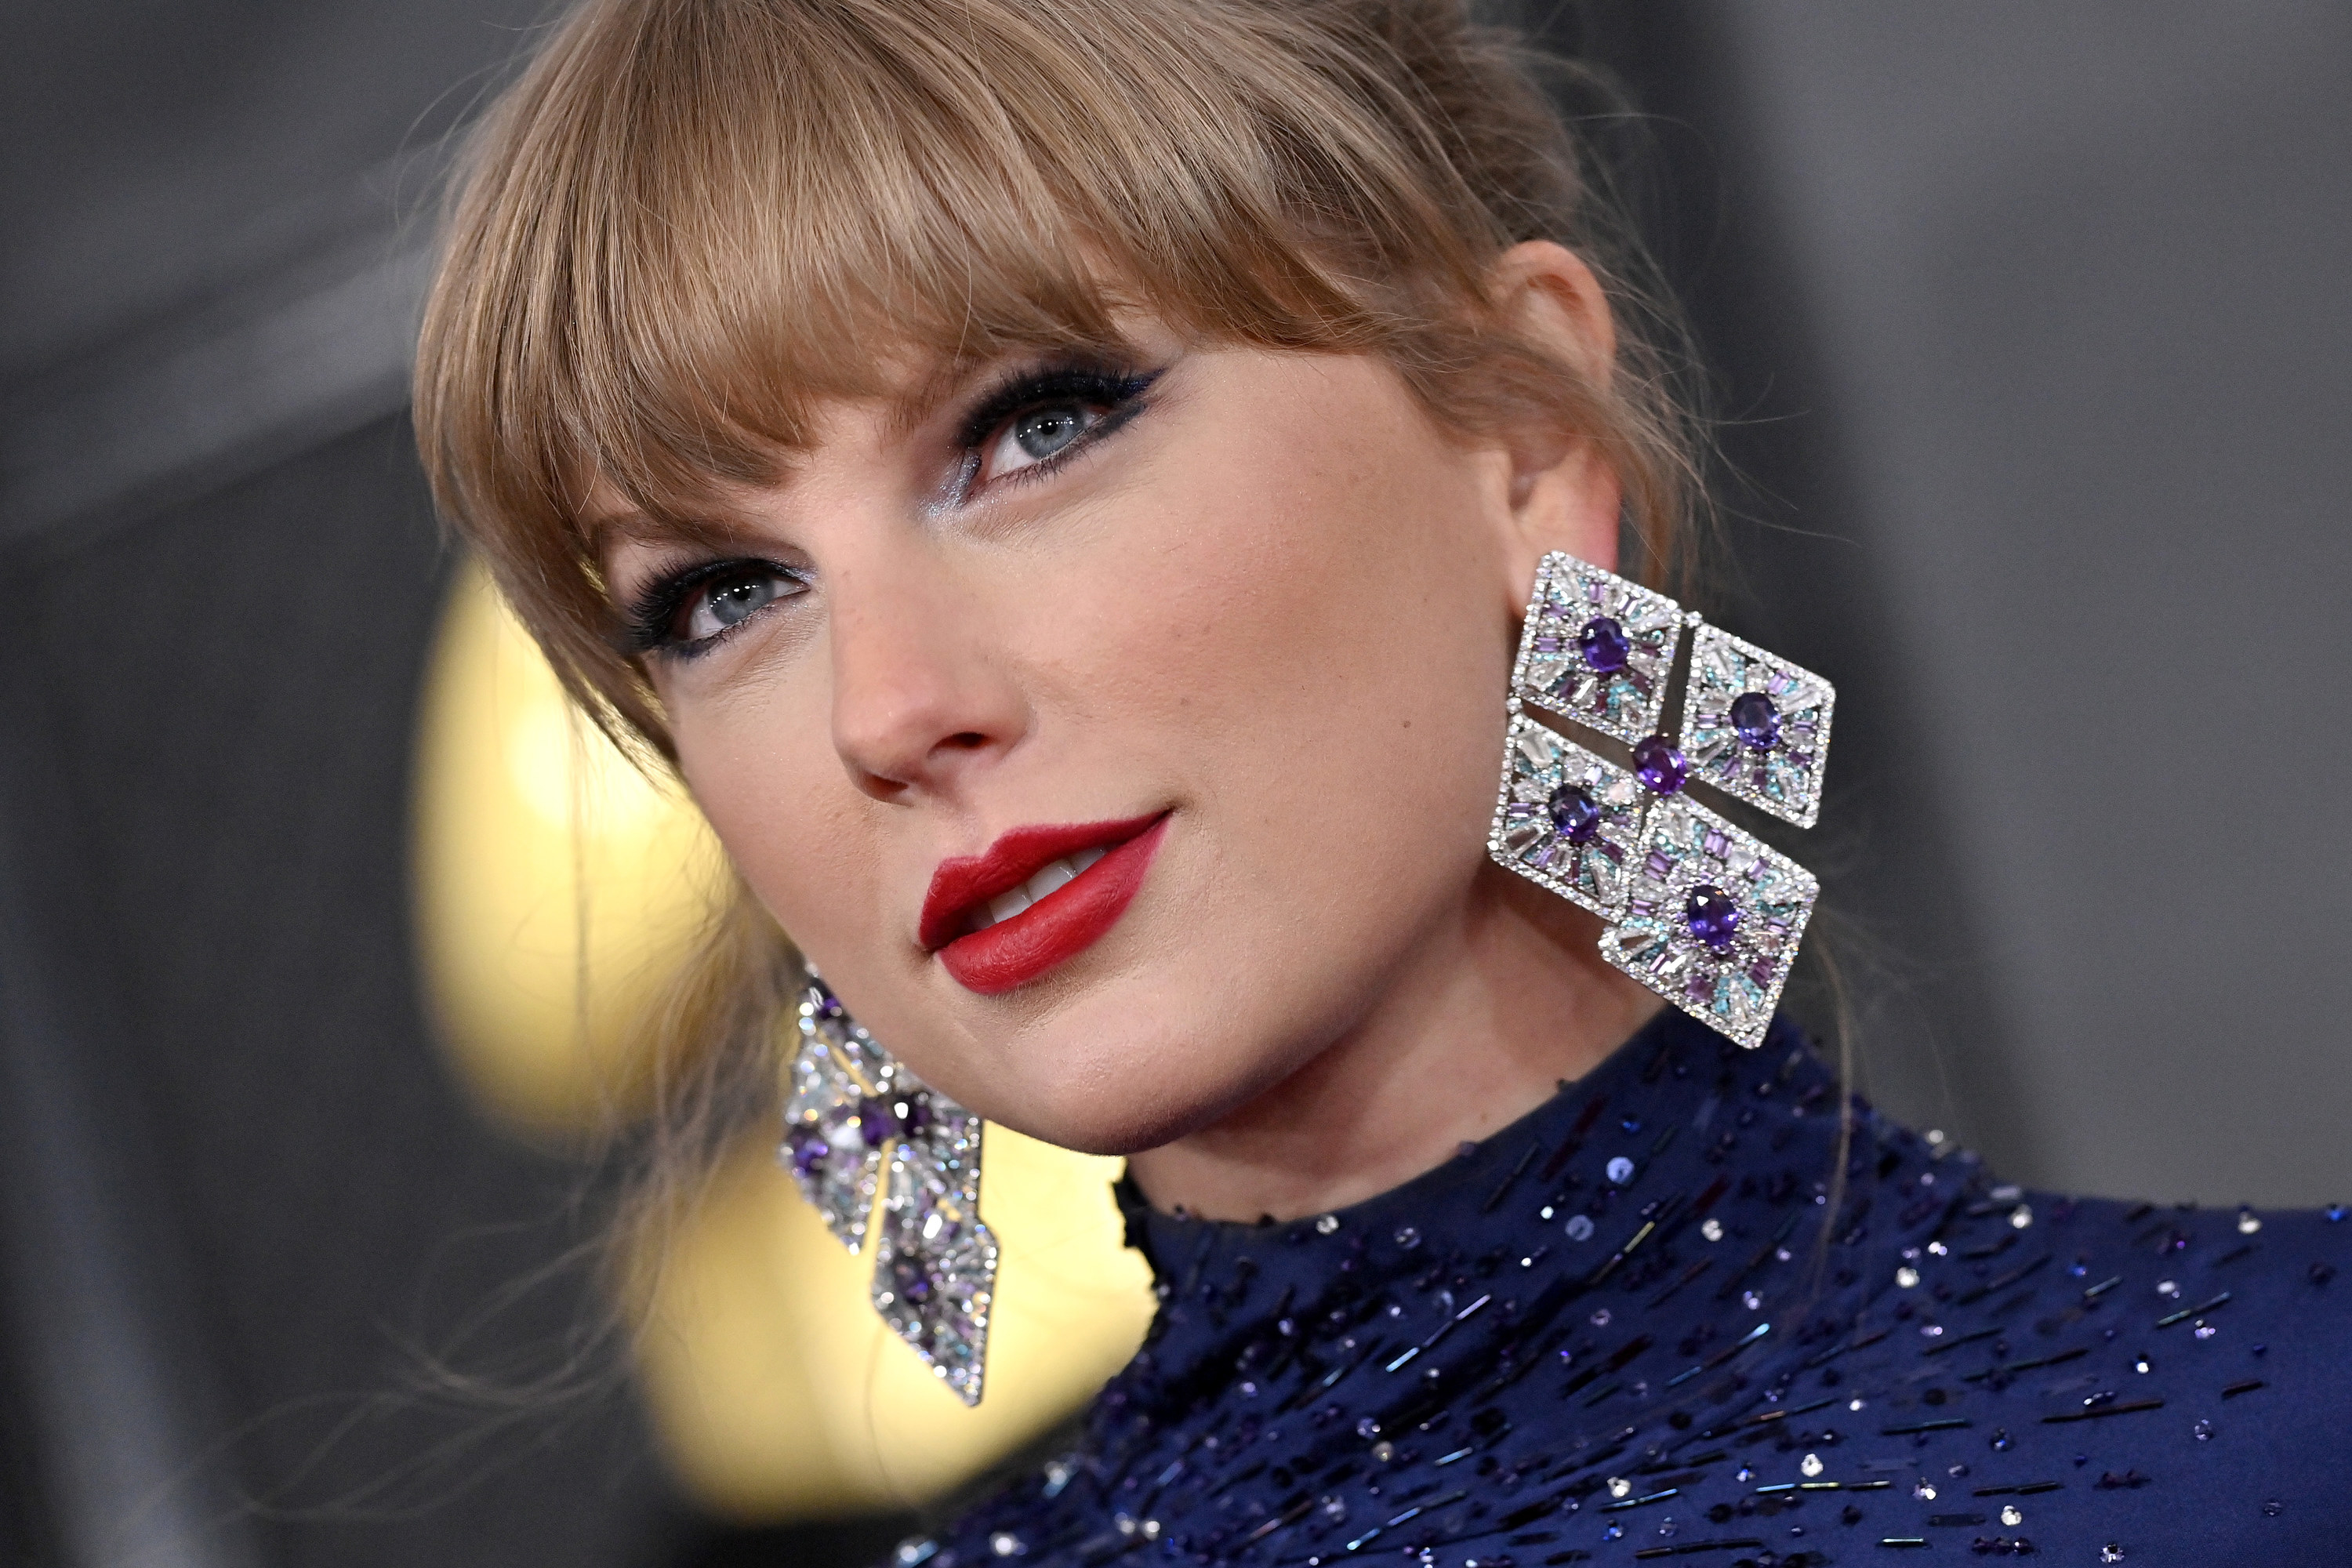 Taylor wears large diamond earrings that consist of four diamond shaped panels held together with a purple sapphire in the middle